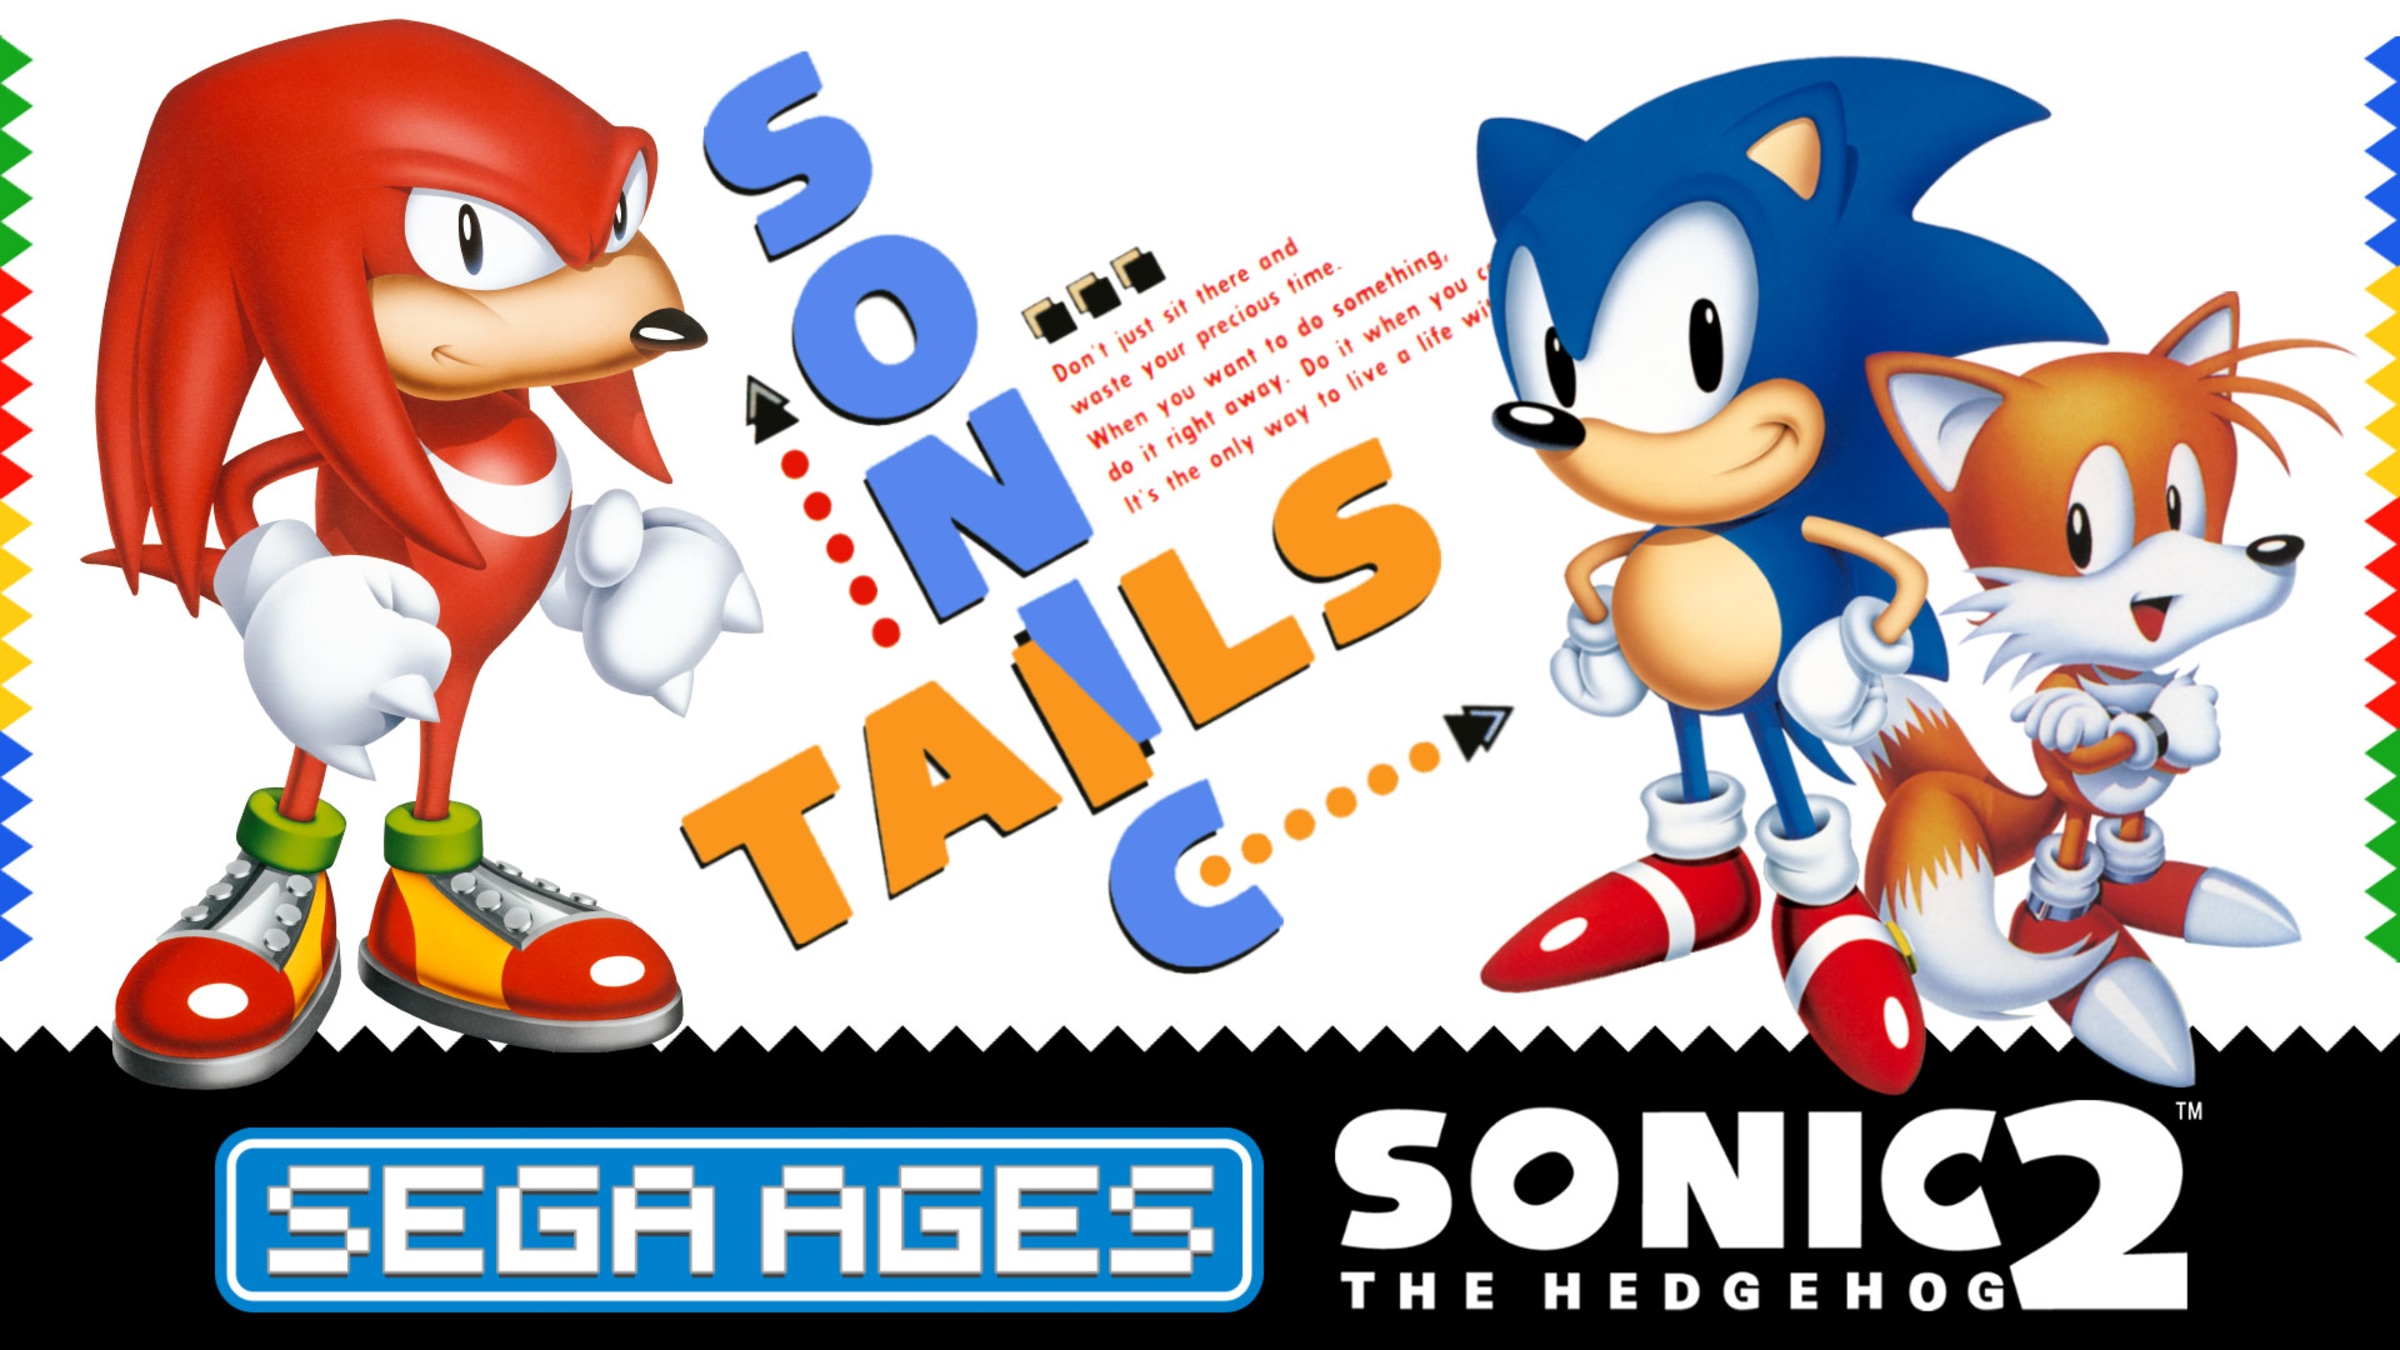 SEGA AGES Sonic Hedgehog 2 for Nintendo Switch Official Site